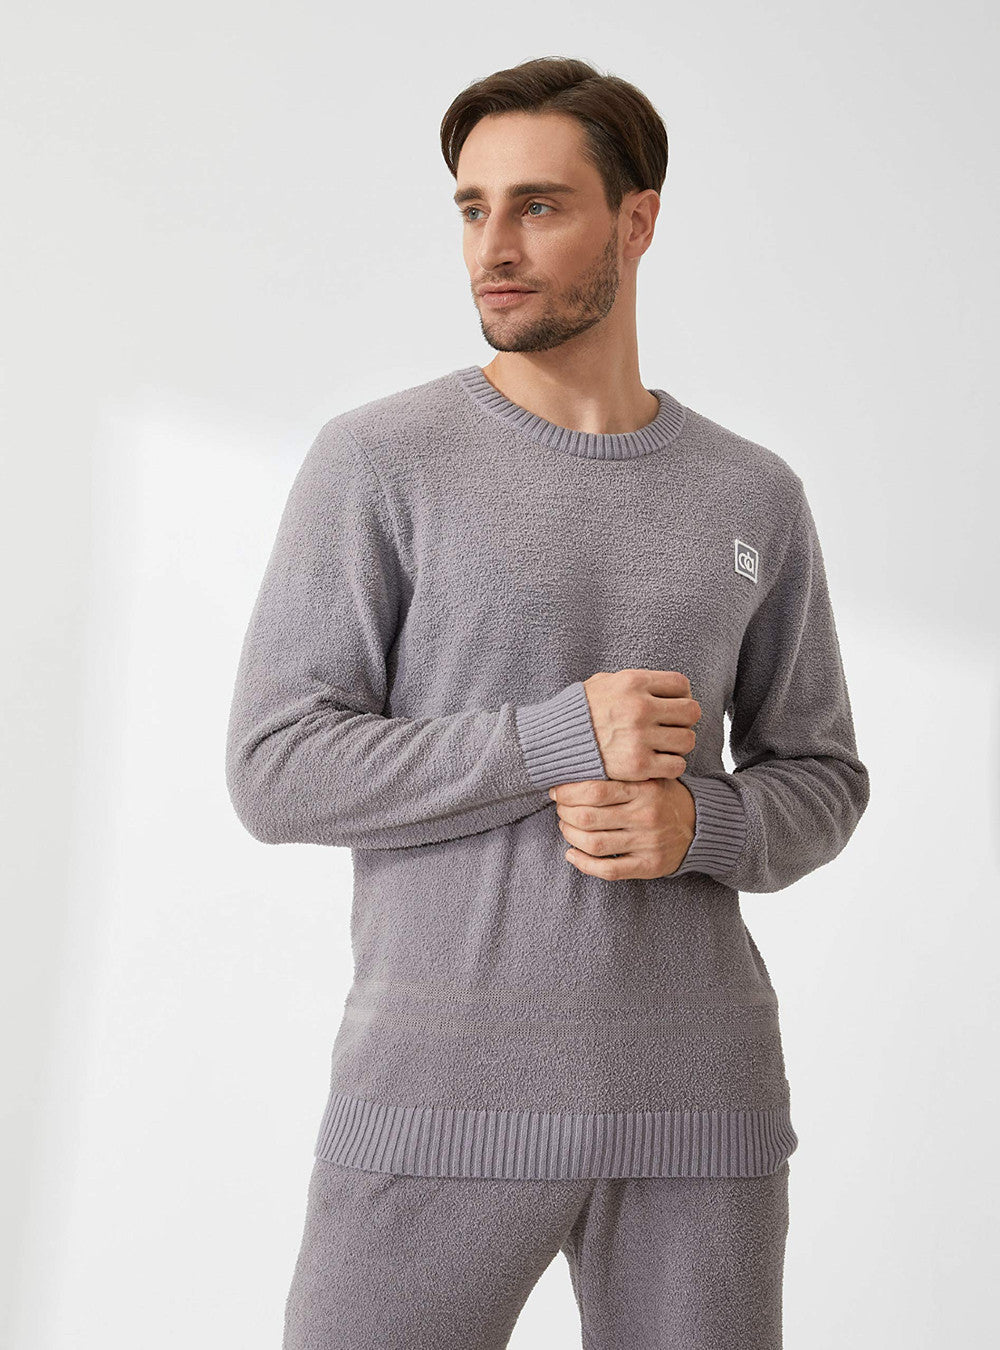 DAVID ARCHY's Warm and Cozy Loungewear Emerges as Standout Option for Men's  Thanksgiving Gifts